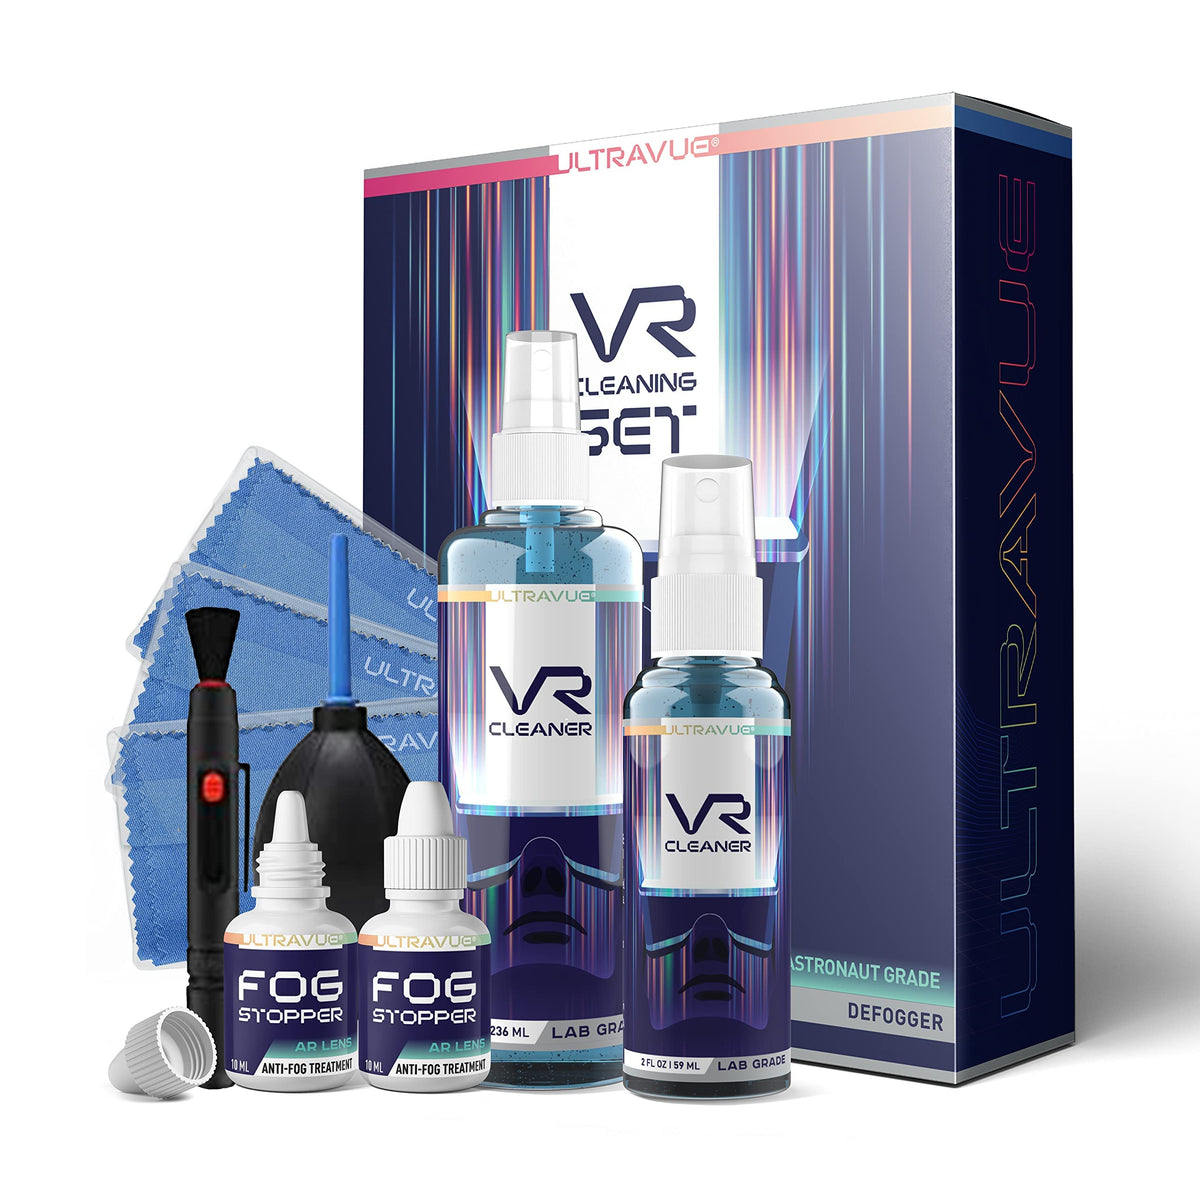 UltraVue VR Cleaning Kit and Anti-Fog Treatment - Includes VR Cleaner Gel Sprays, Microfiber Cloths, Anti Fog Drop Treatments, Brush and Air Bladder with Precision Nozzle